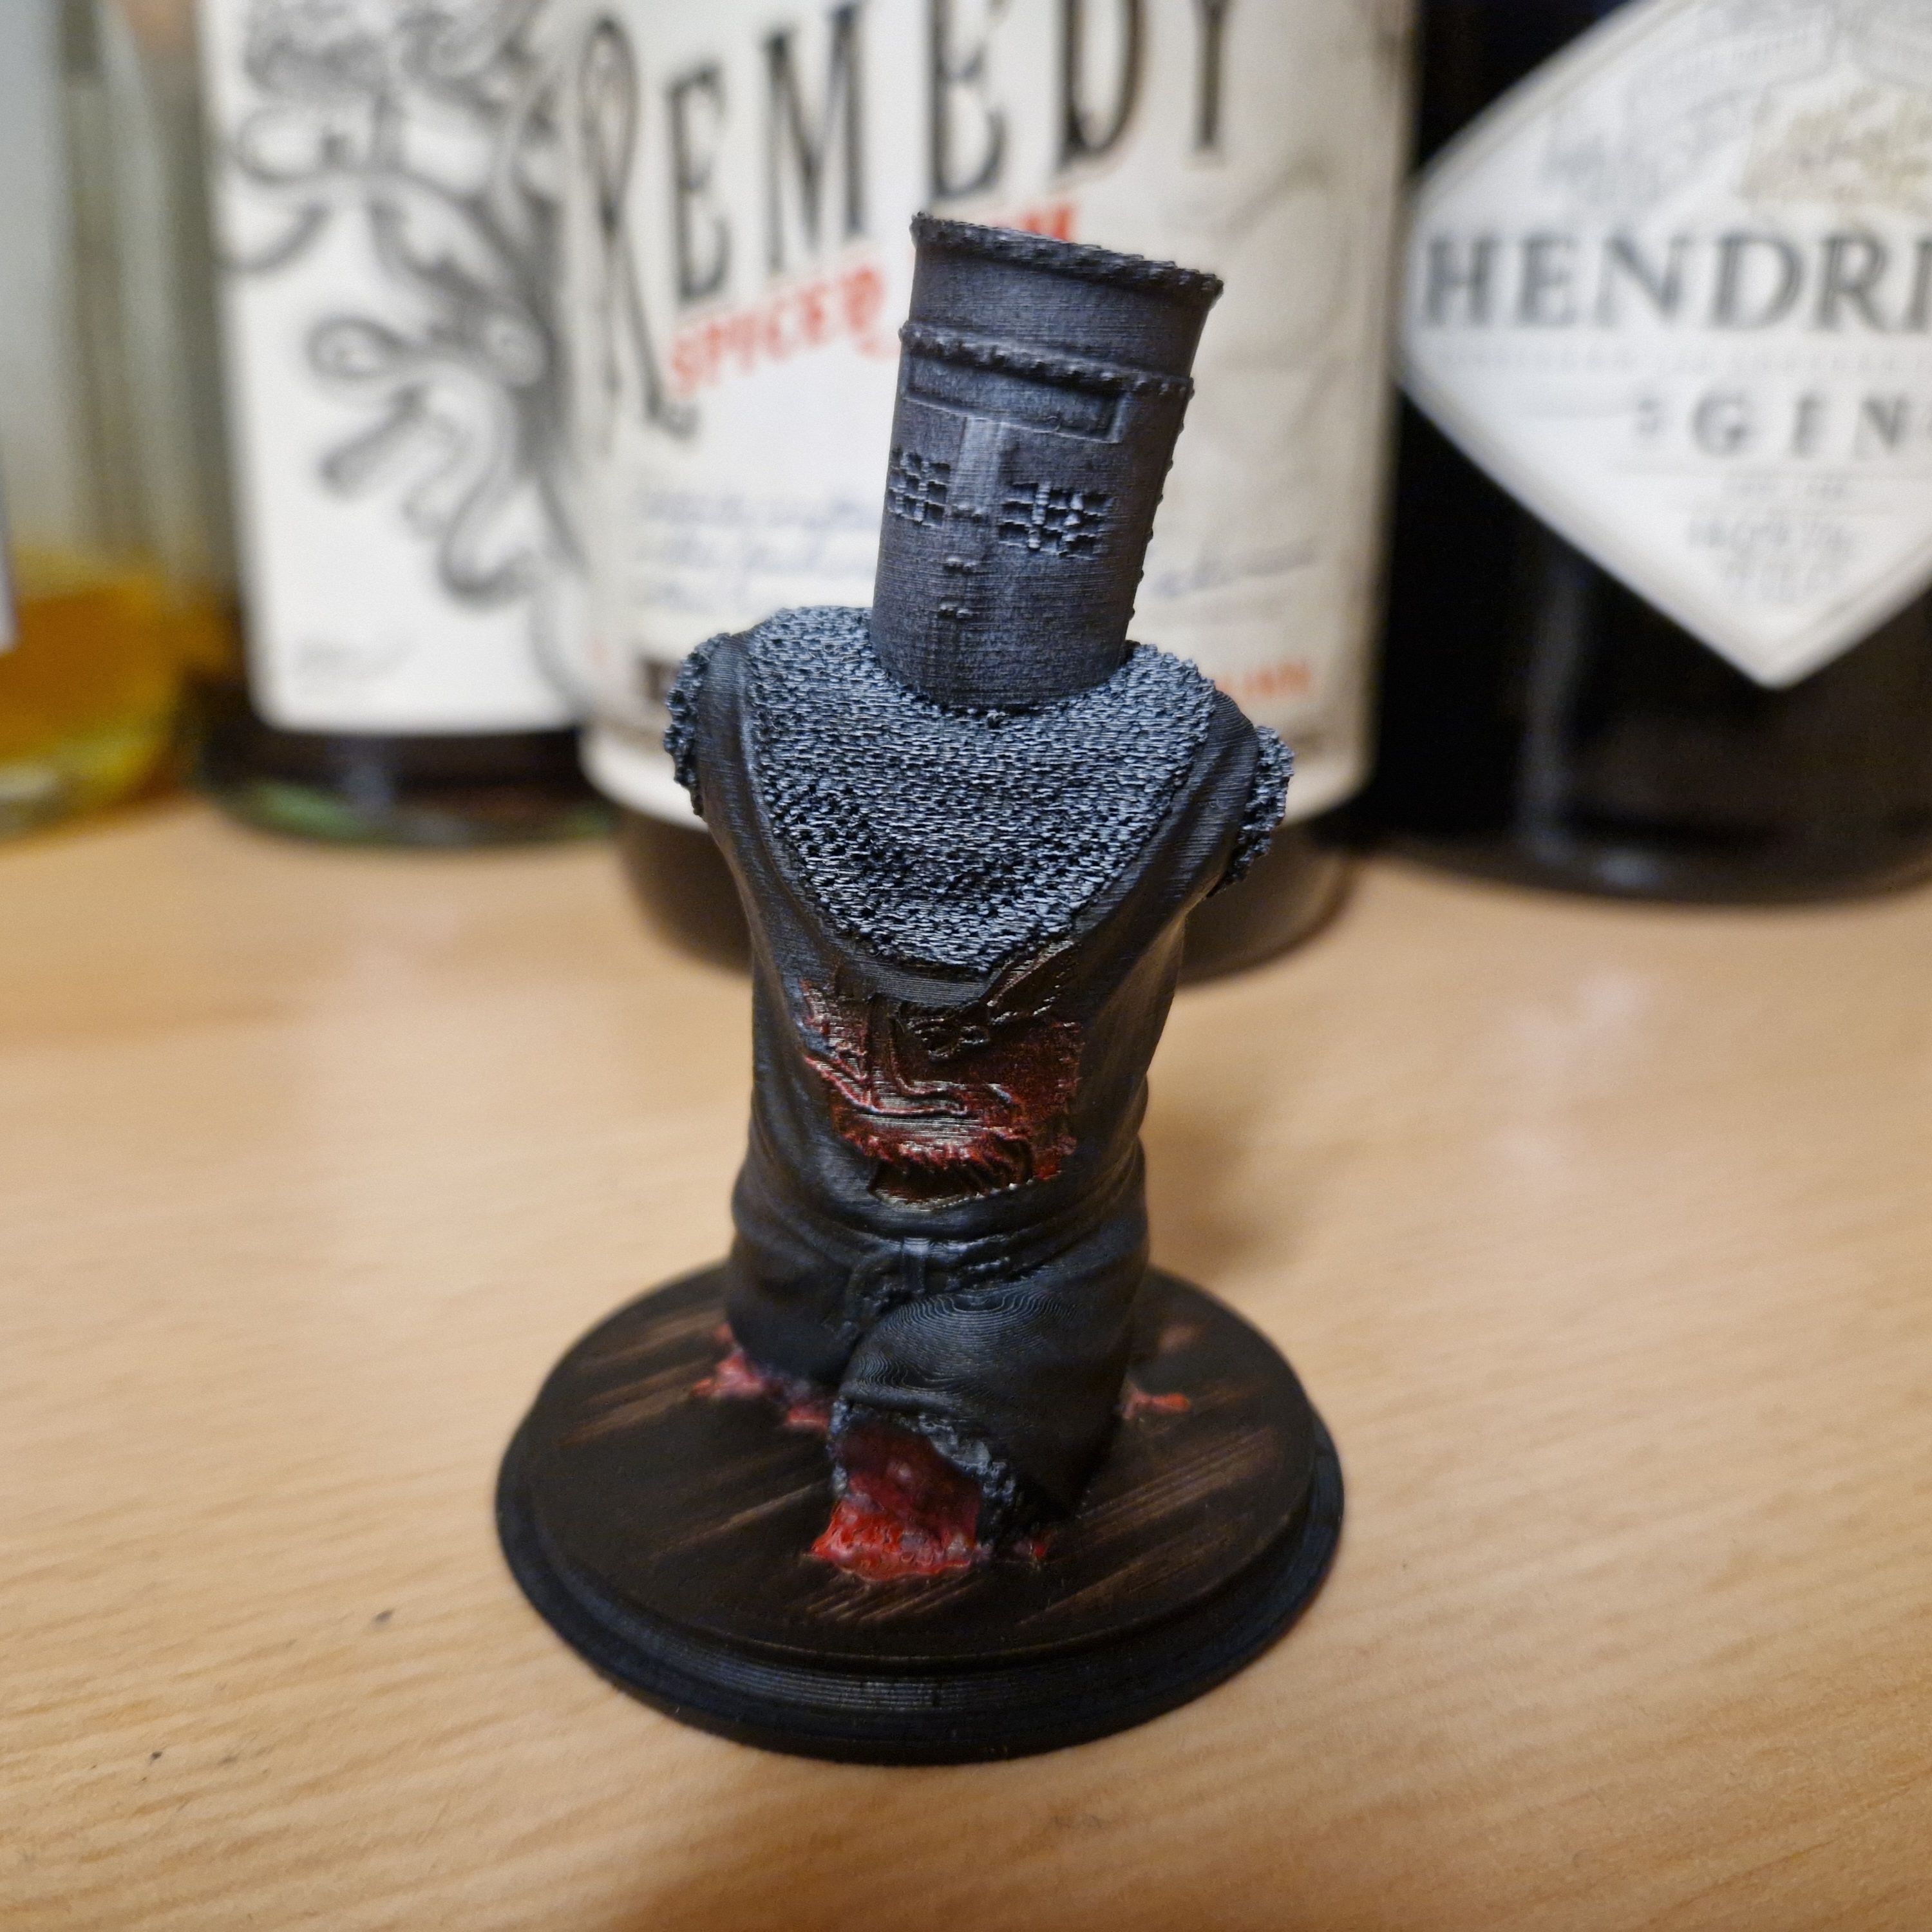 Black Knight -Monty Python - Alright, we'll call it a draw.

Printed with Anycubic Black Pla, zenithal primed, then painted with Army Painter Speedpaints.